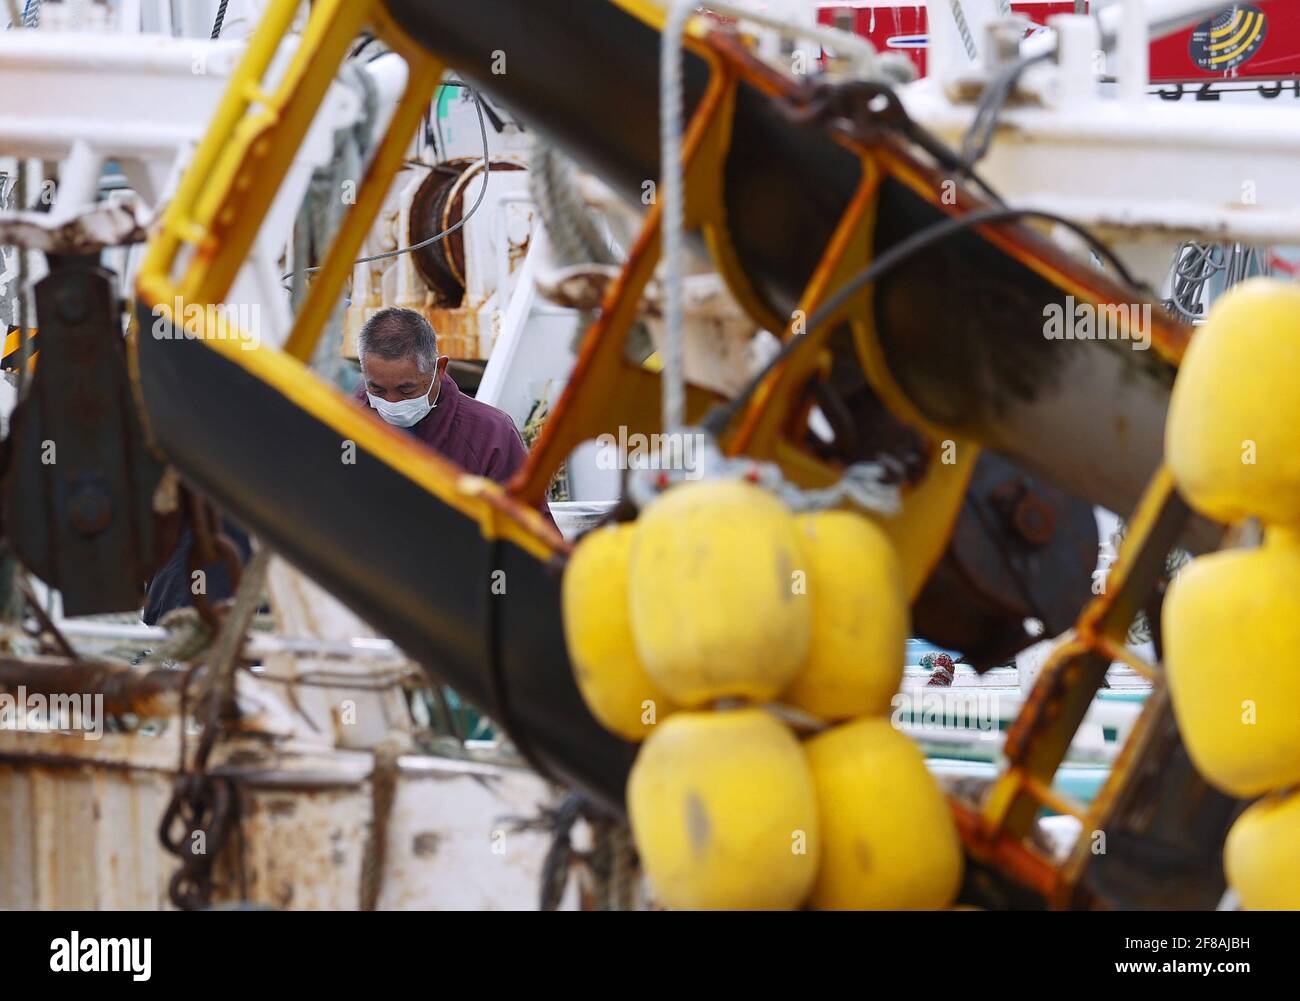 Fukushima Japan April 13 21 A Fisherman Engages In Maintenance Work On A Fishing Boat At A Port In Soma In Fukushima Prefecture Northeastern Japan On April 13 21 The Japanese Government